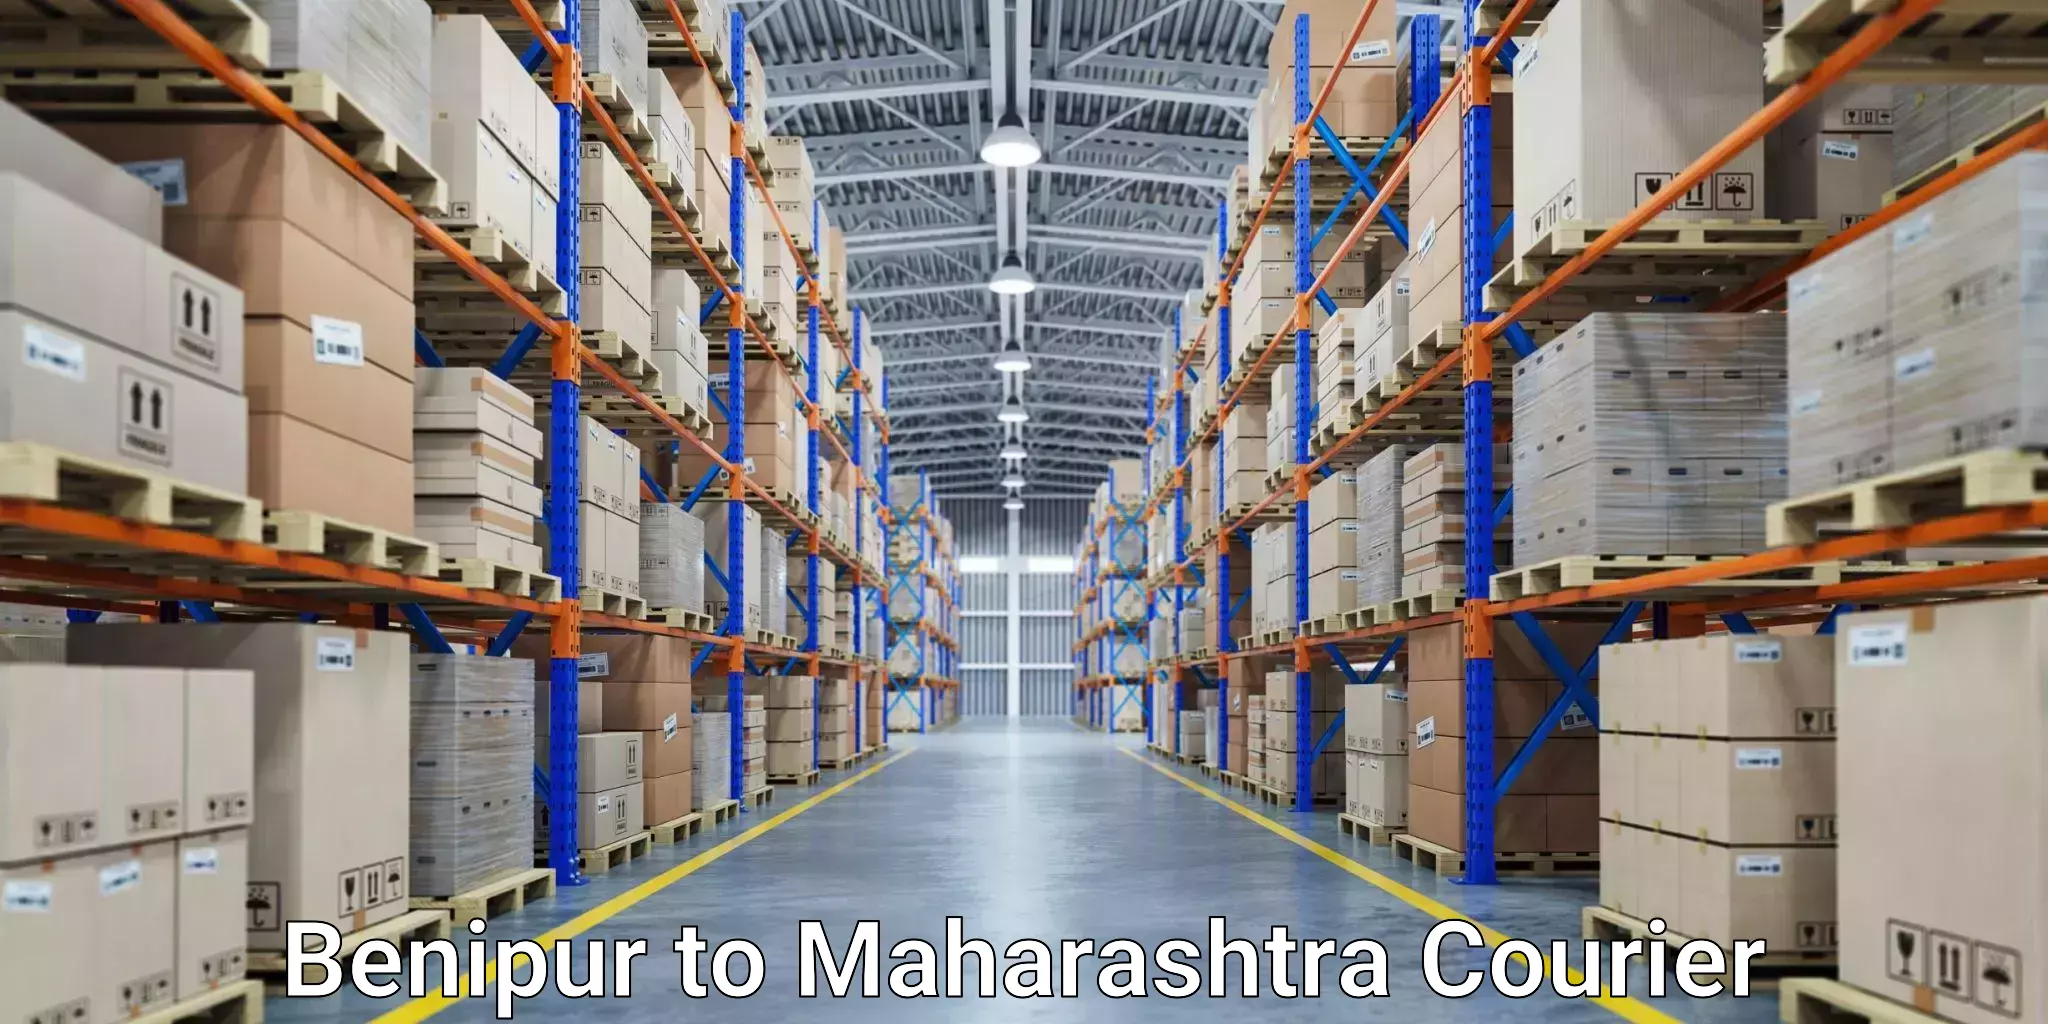 Flexible delivery schedules in Benipur to Maharashtra